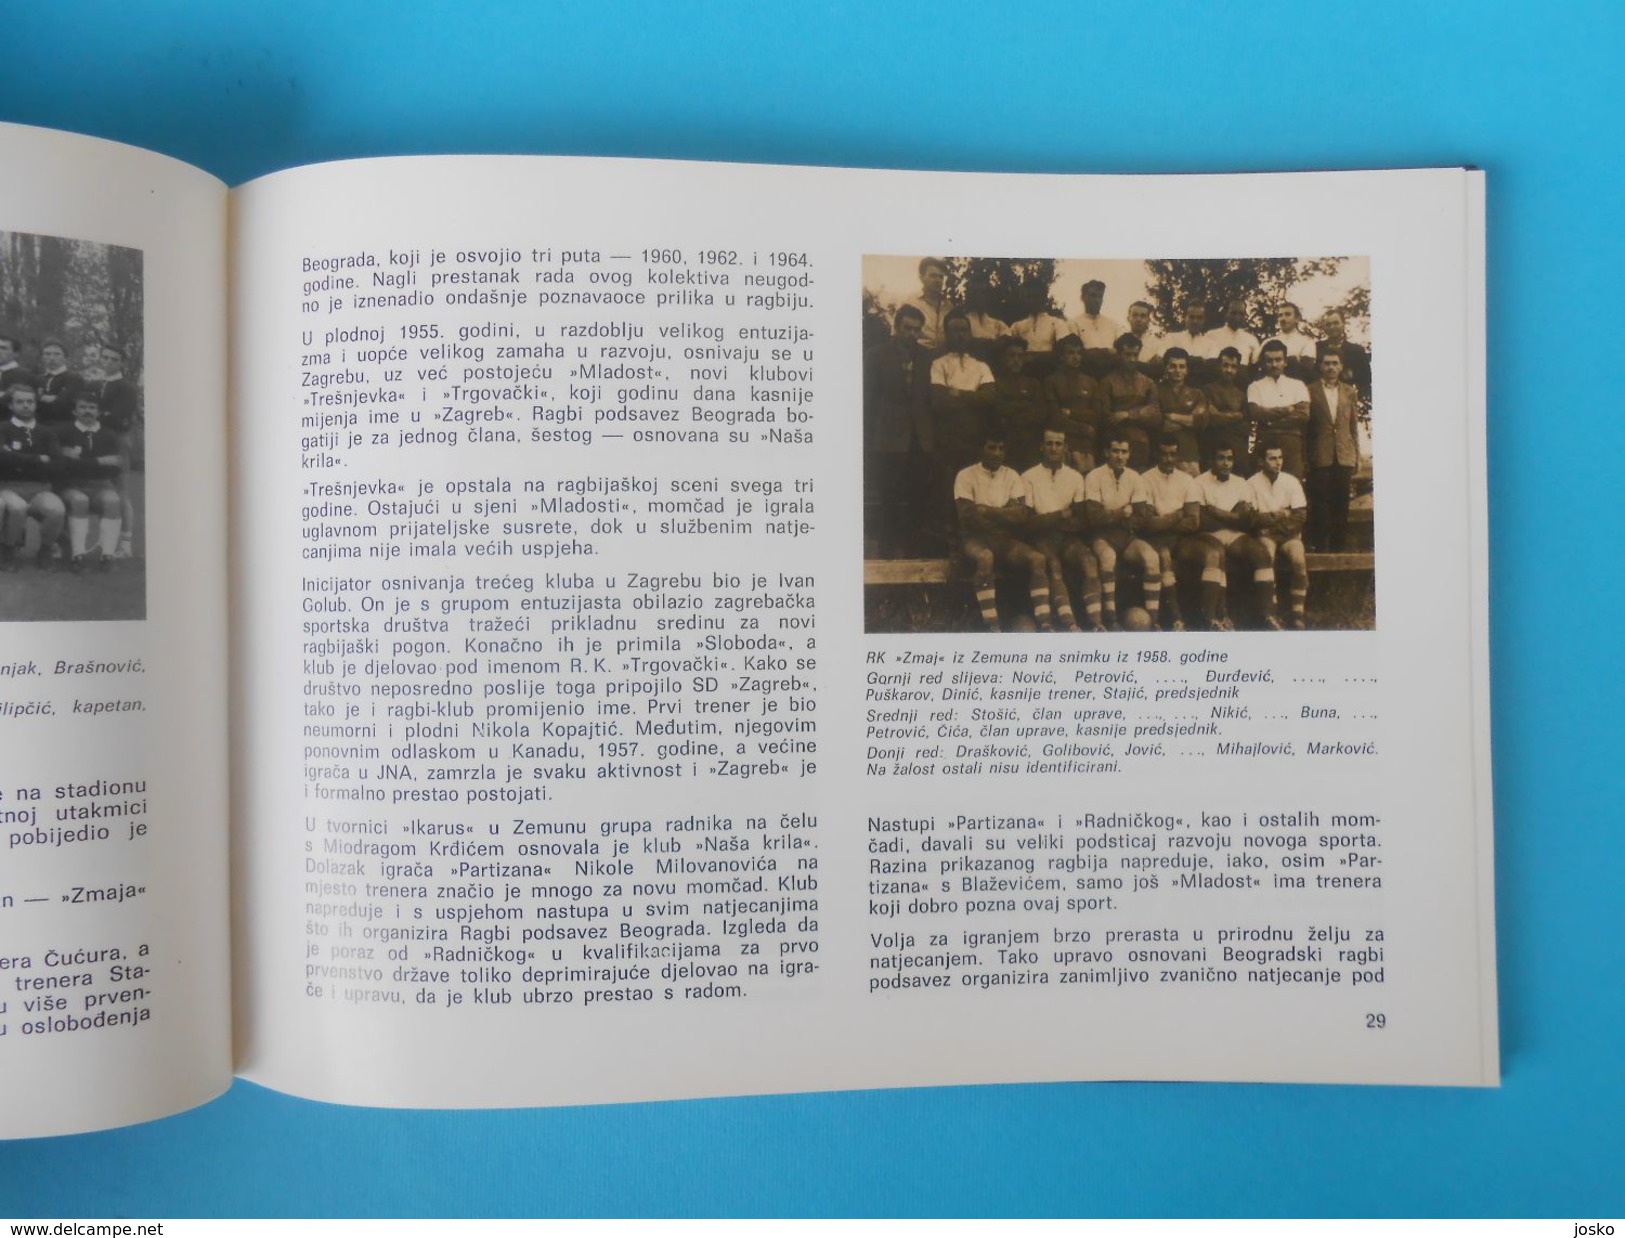 YUGOSLAV RUGBY FEDERATION 1954-1984 ... official book ( monograph ) * Yougoslavie Rugby Association monographie